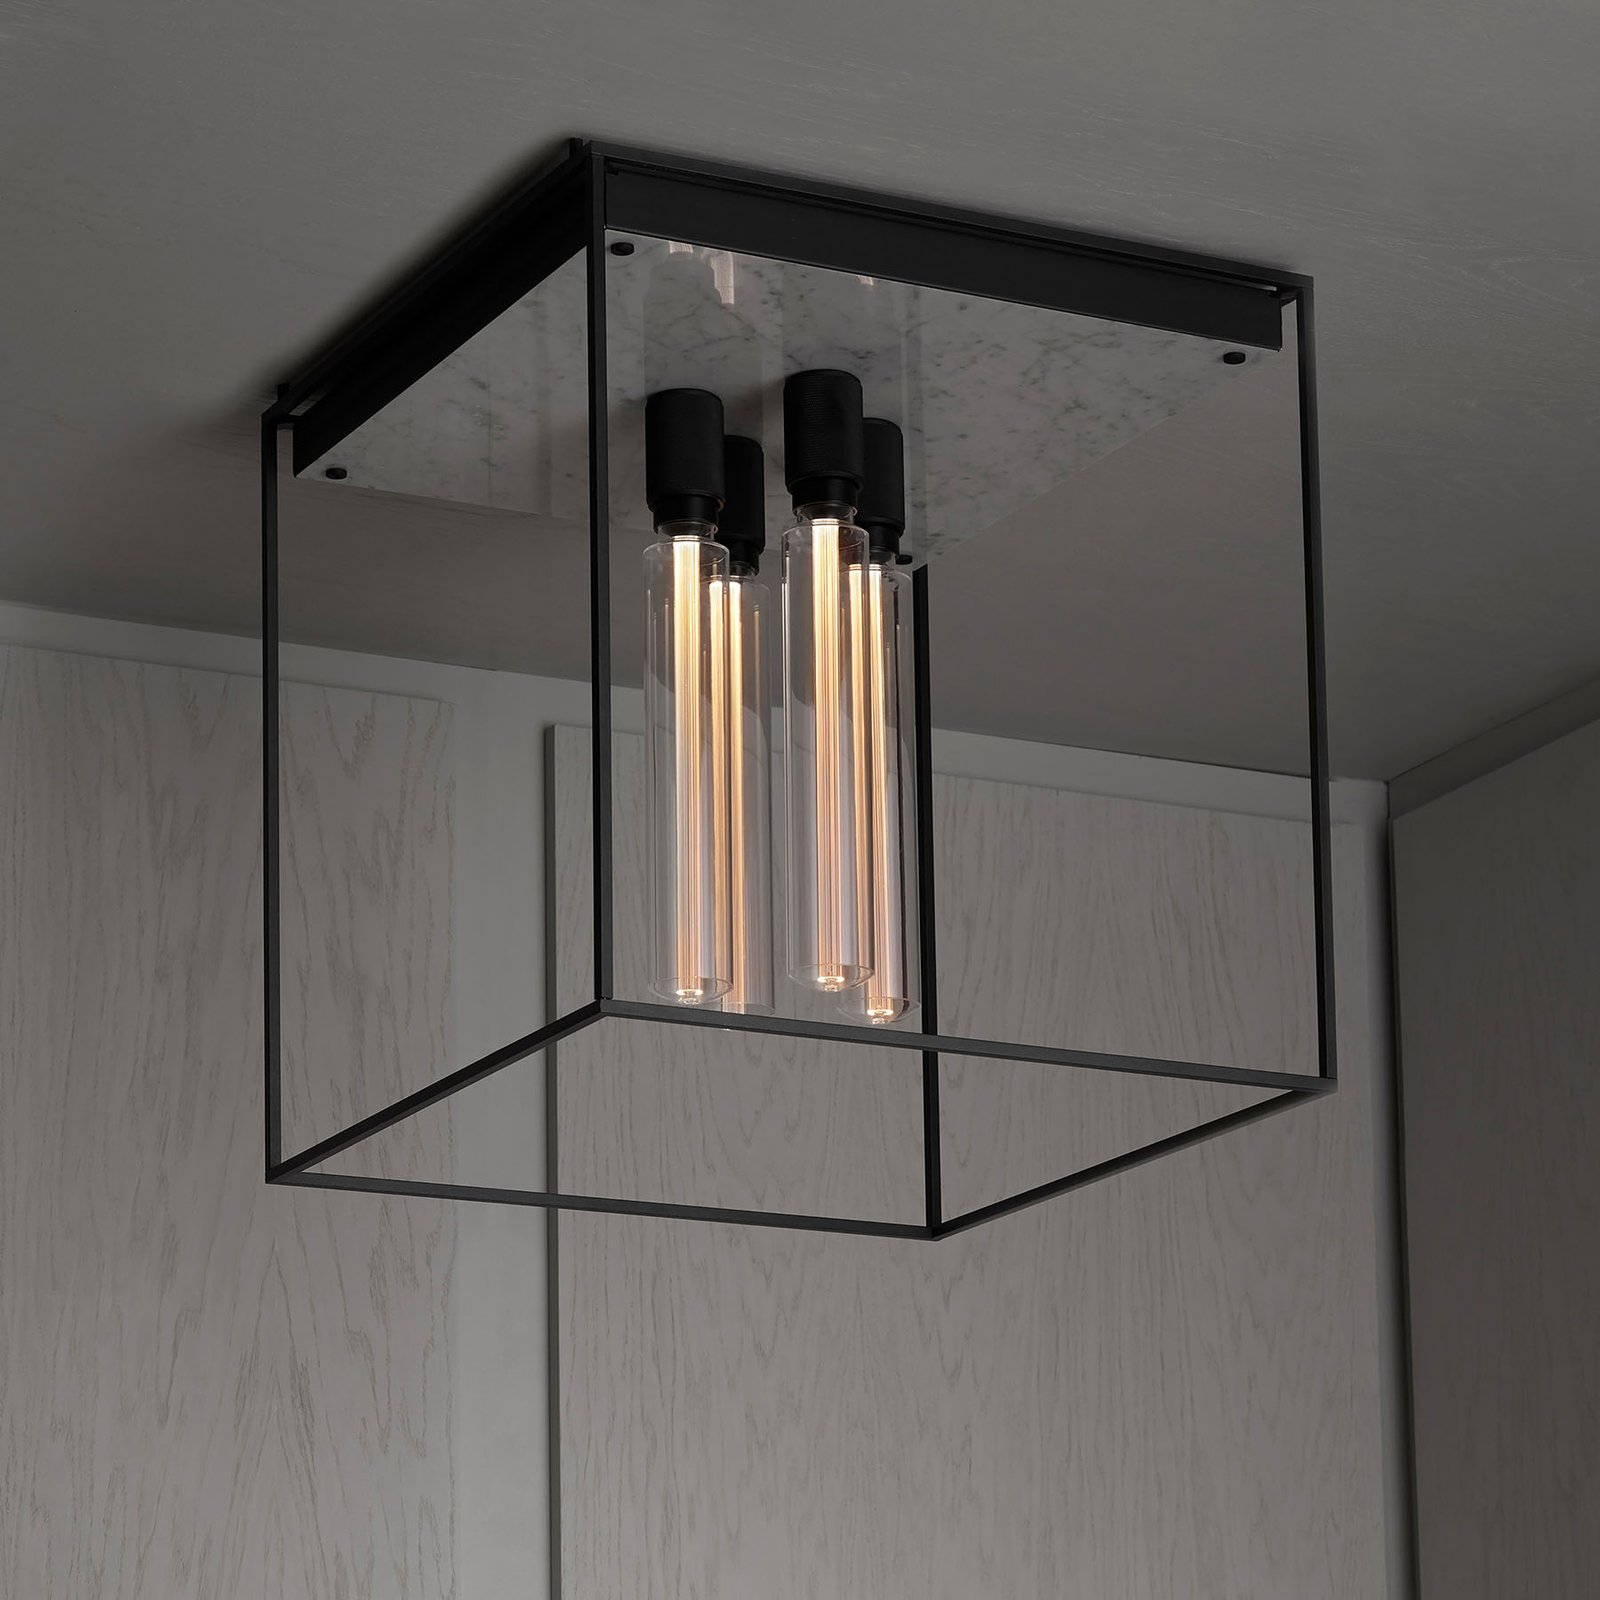 Buster + Punch Caged Ceiling 4.0 LED Marmor weiß